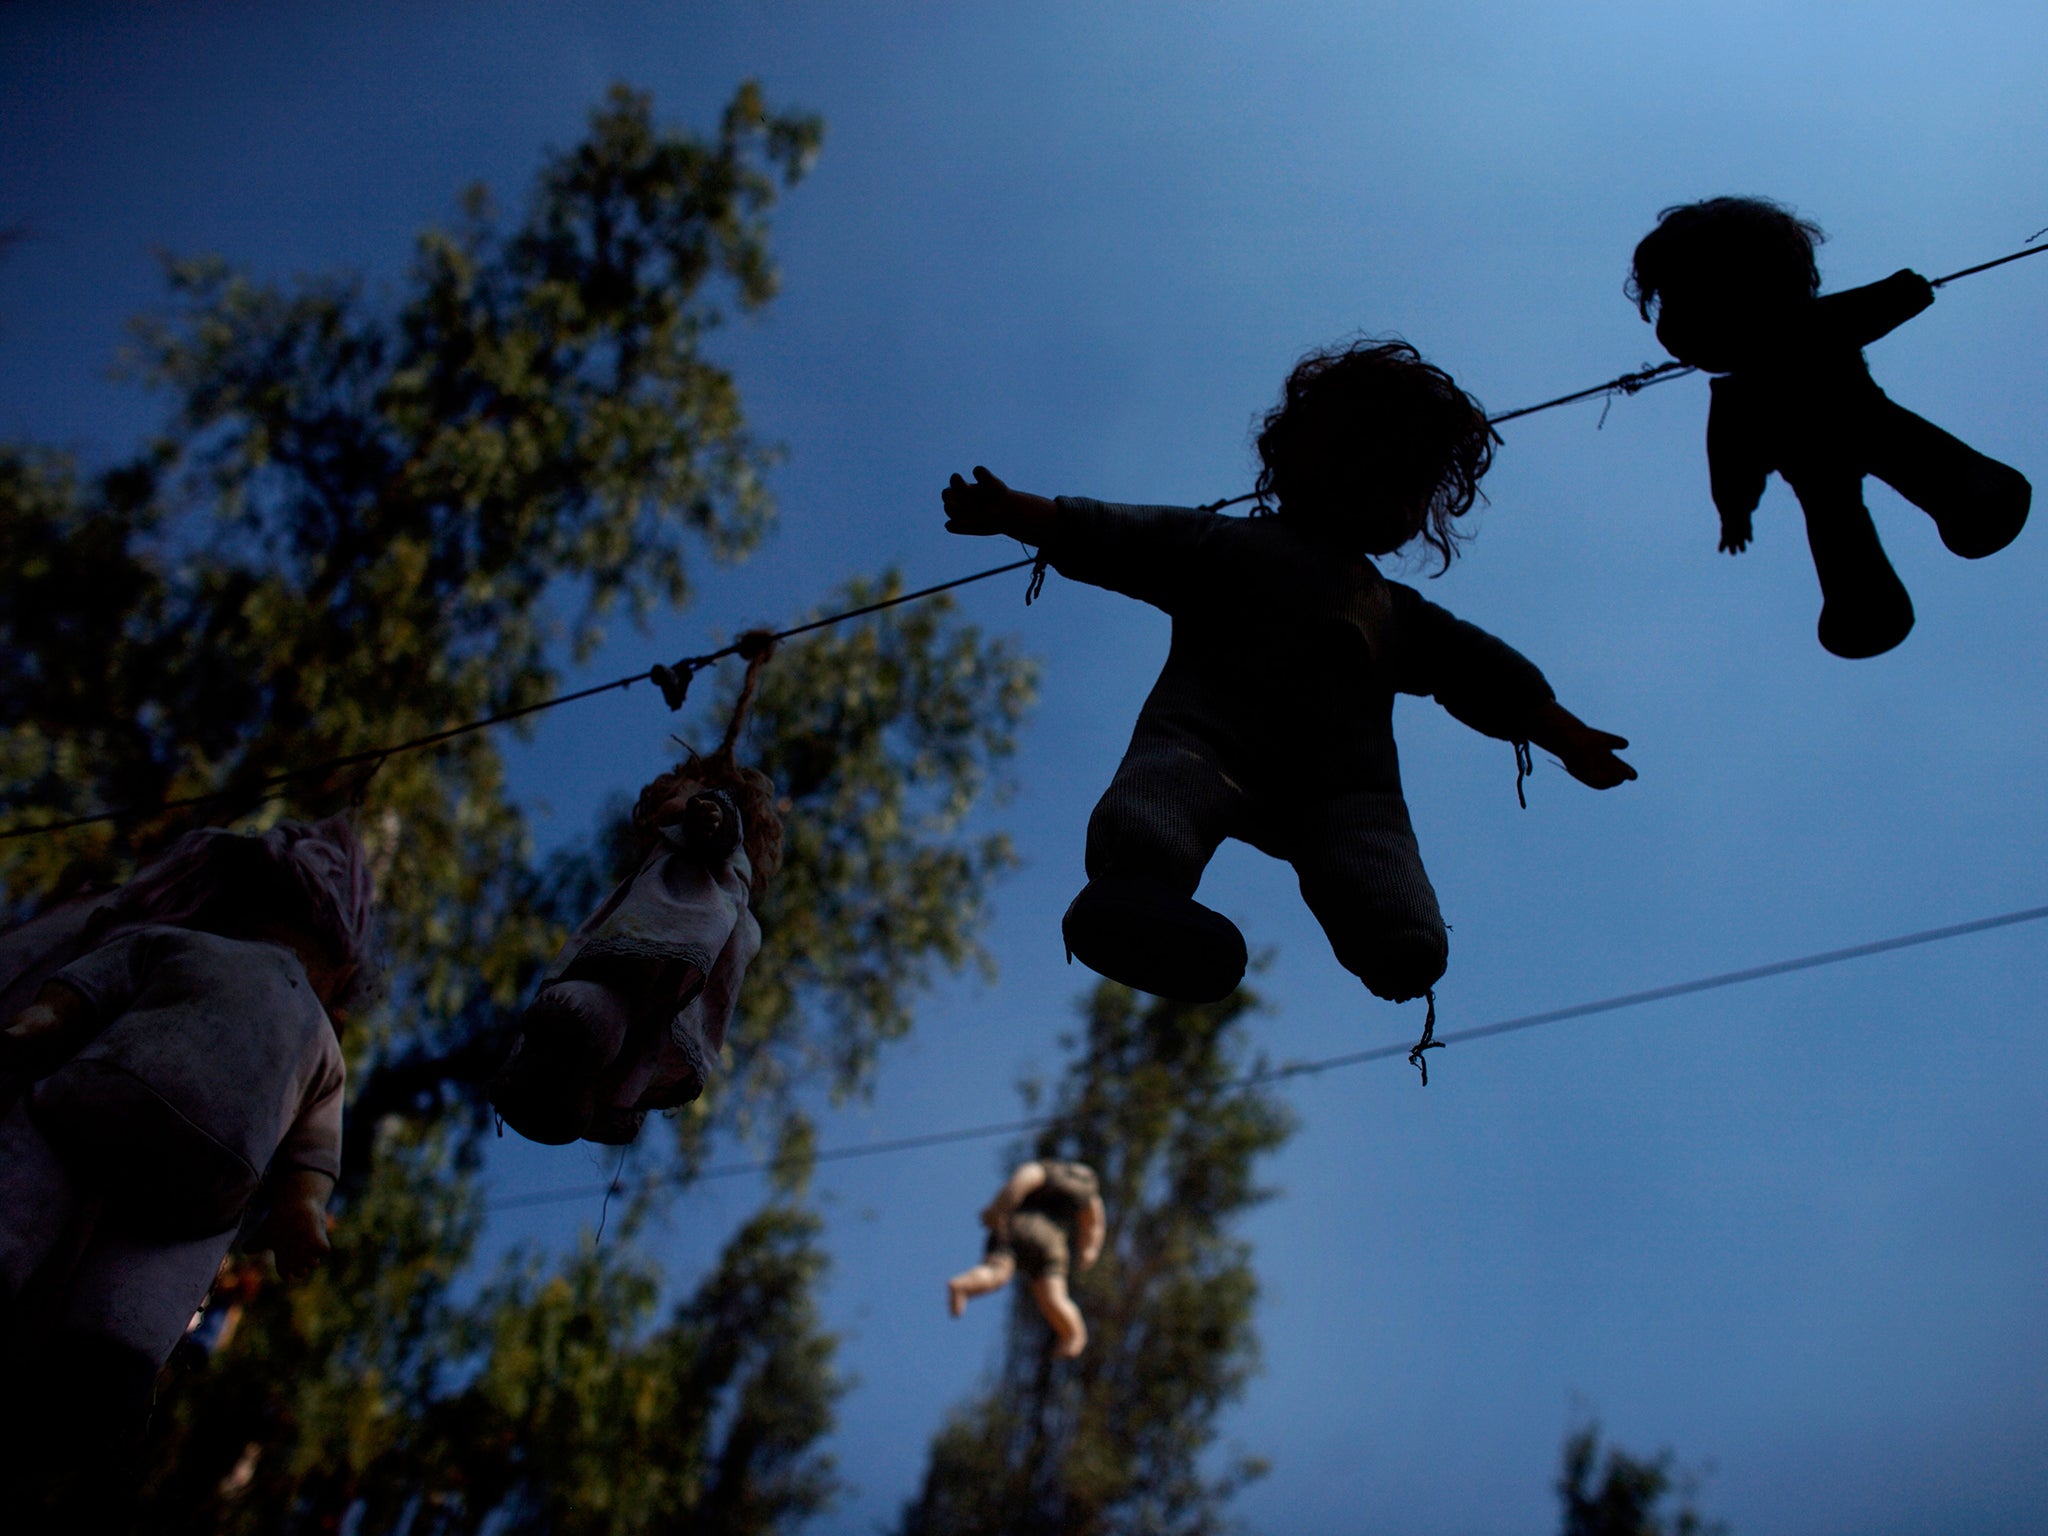 Dolls hang on a clothes line on the Island of the Dolls in Xochimilco